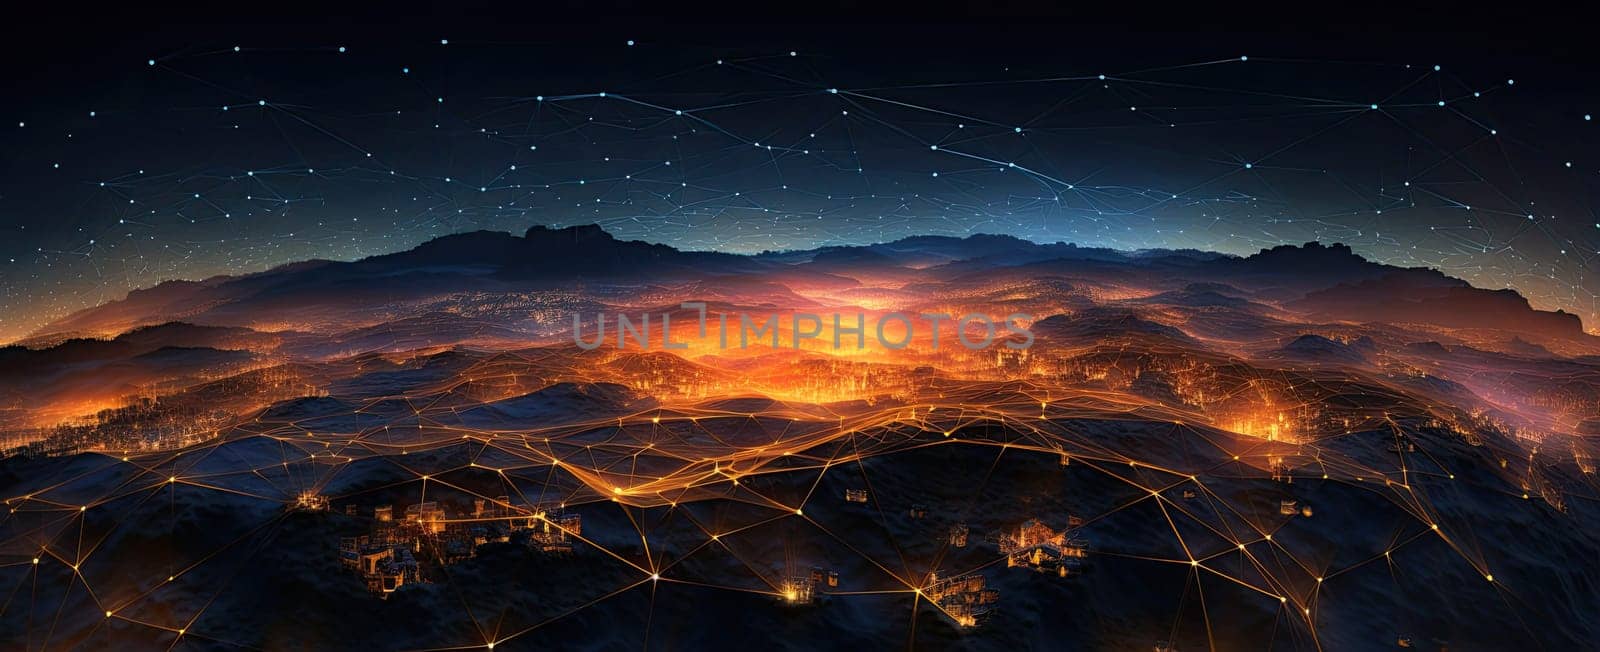 Center of the modern city and the visible network of signals around. Communication and Business Concept